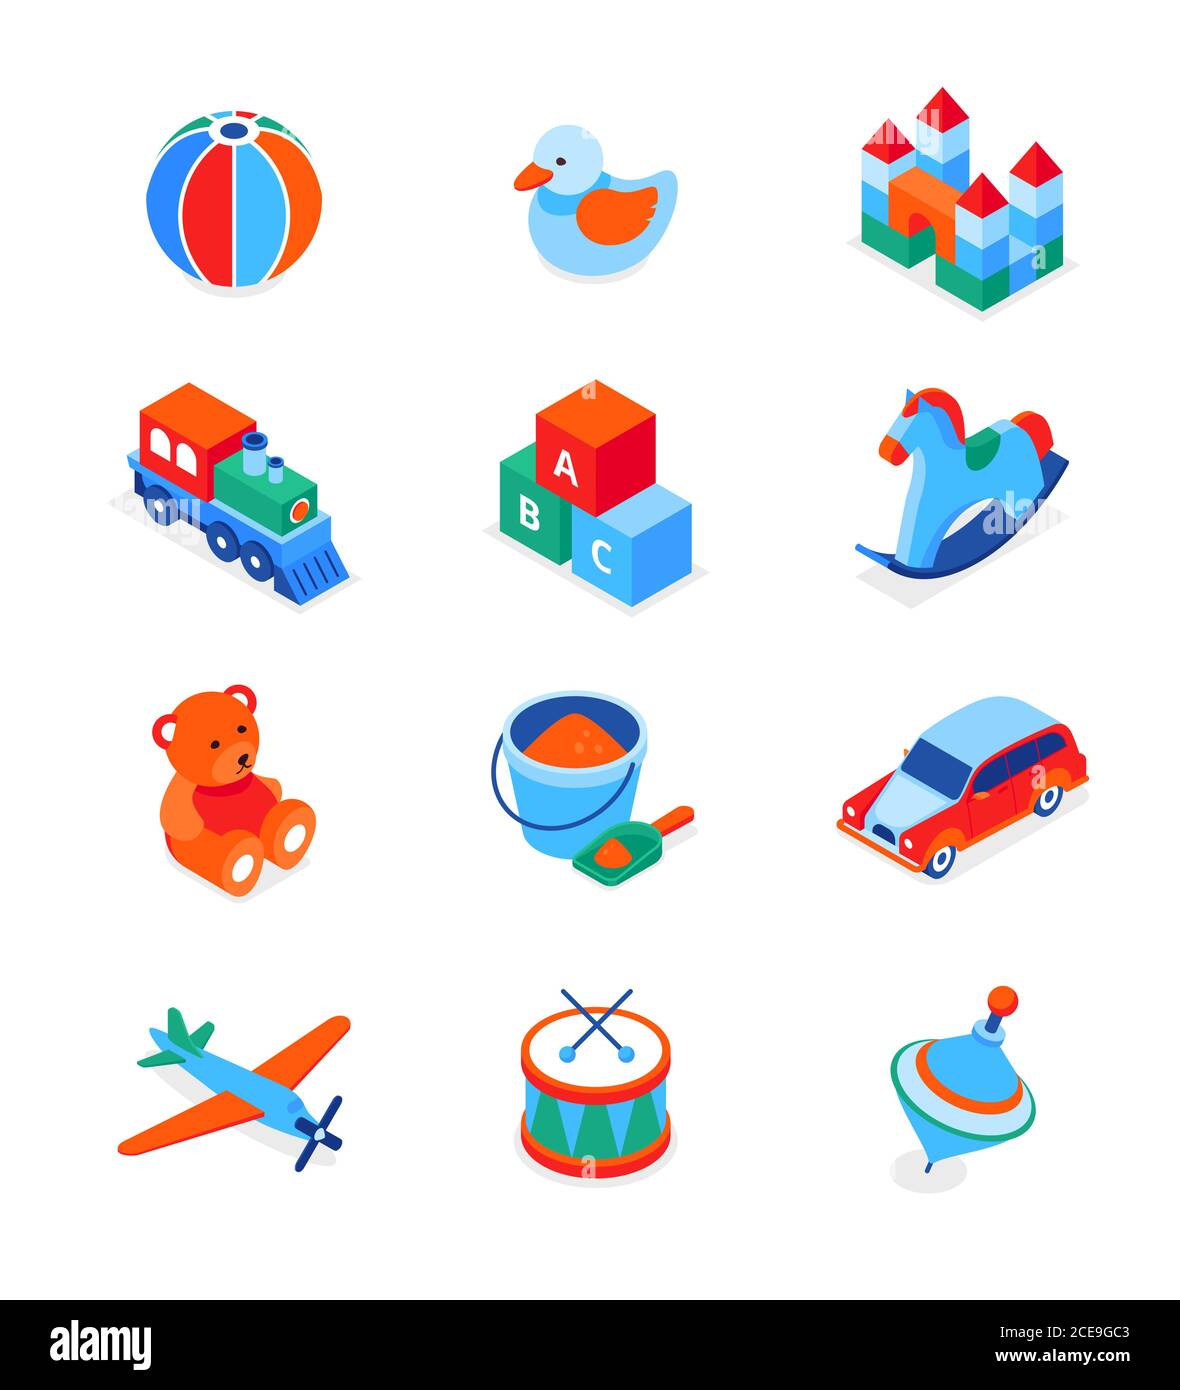 Toys and leisure games for children - modern isometric icons set Stock Vector